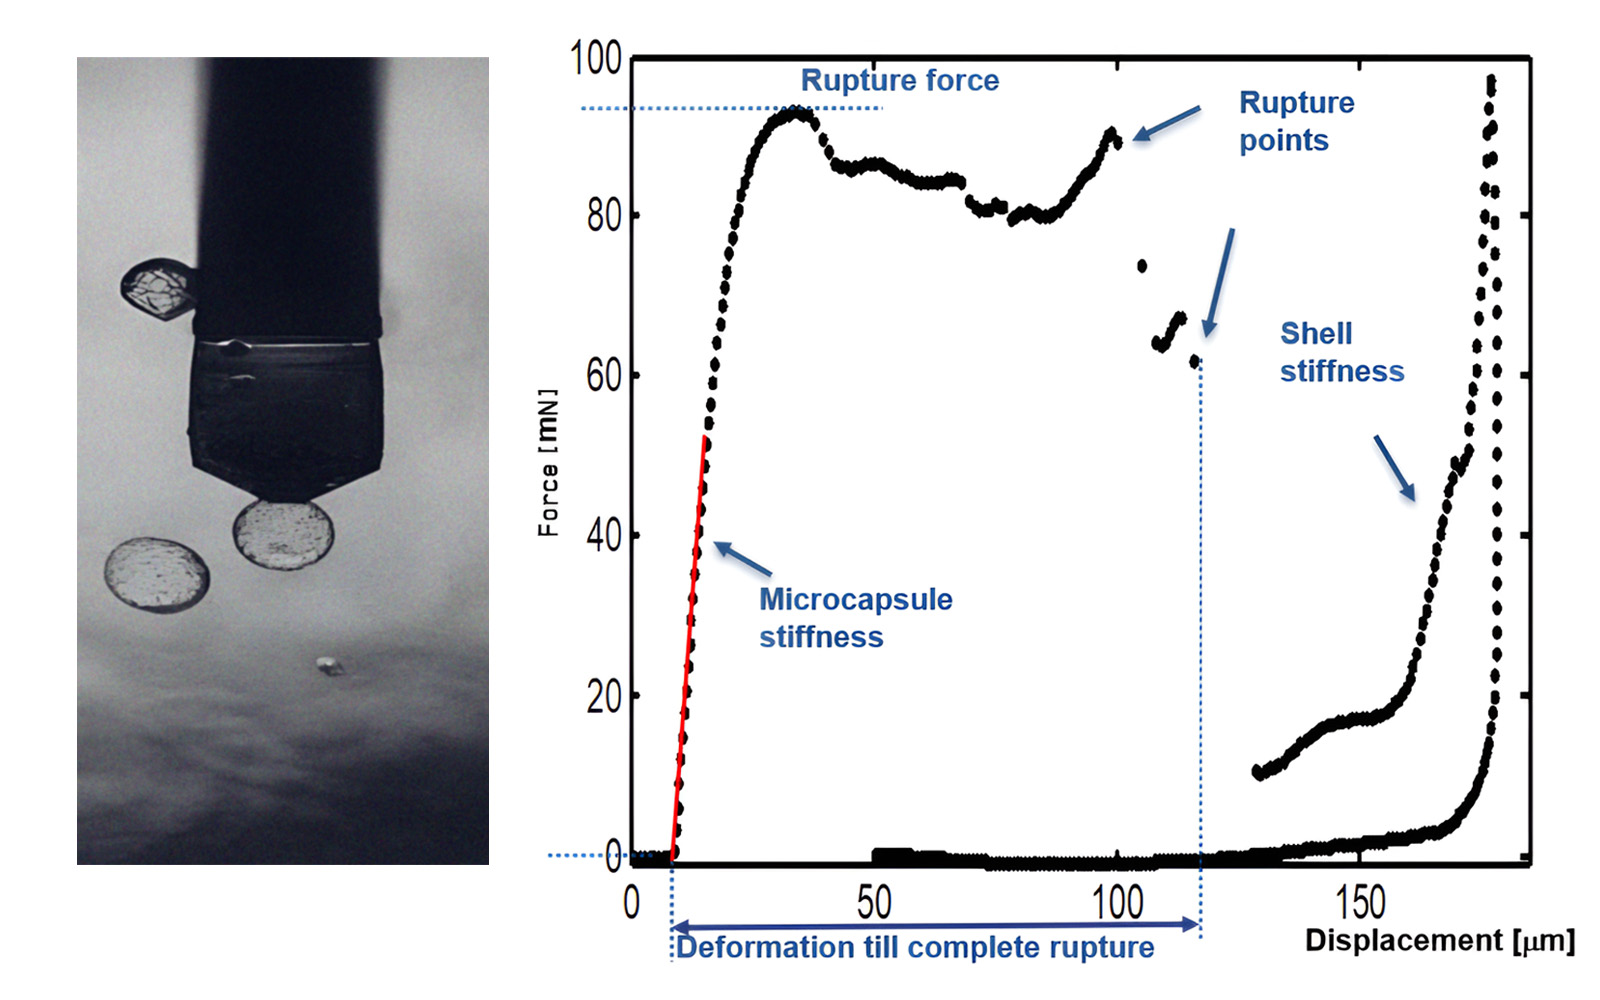 Graph showing force-deformation relationship of a hydrogel microcapsule during a compression test, indicating stiffness and rupture points.